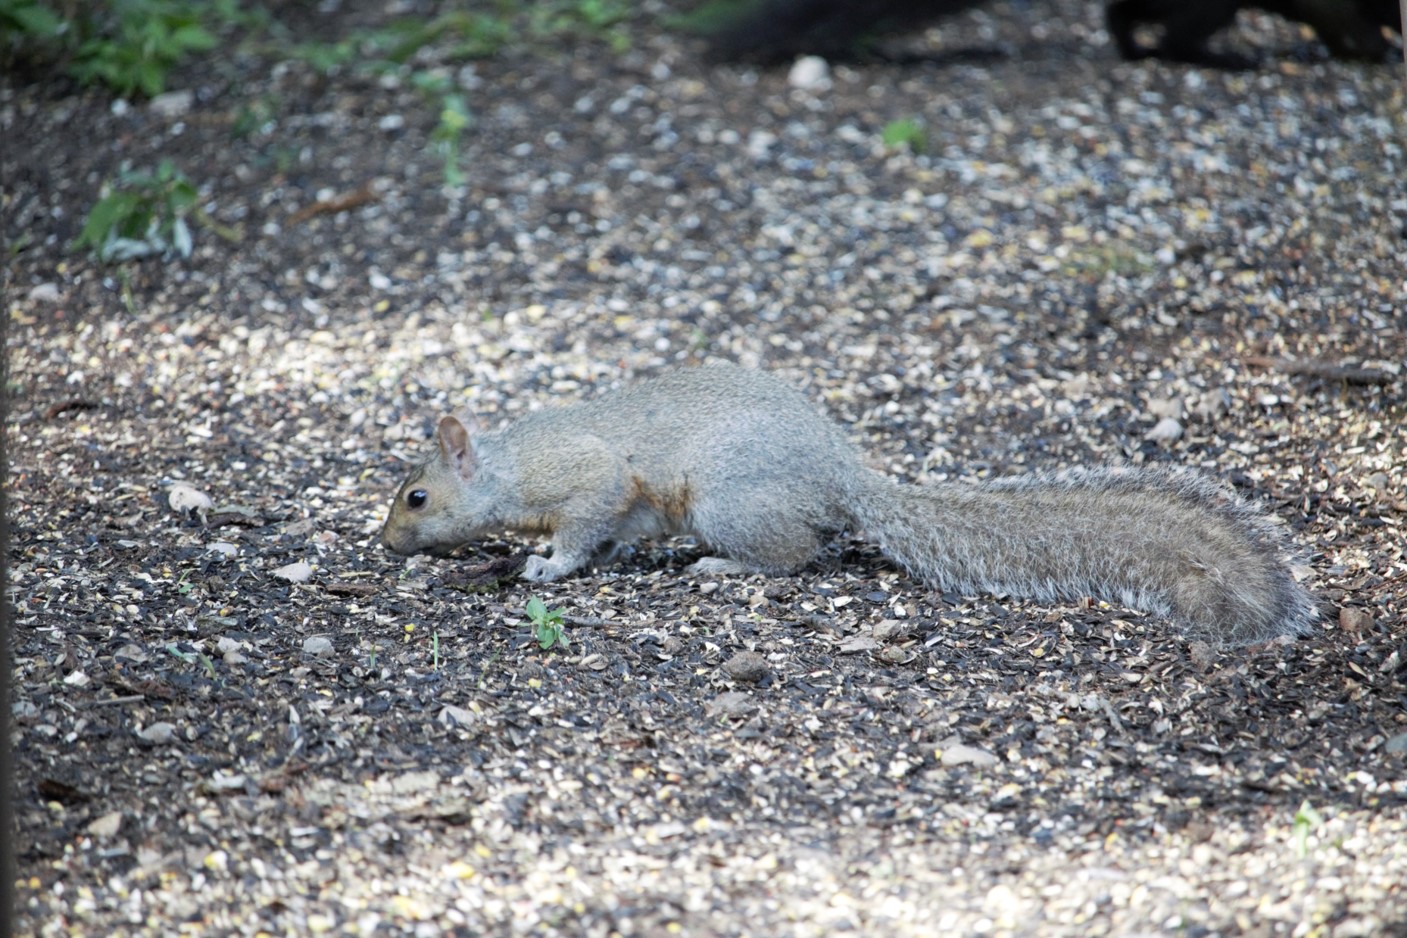 Squirrel eating seeds on the ground outdoors